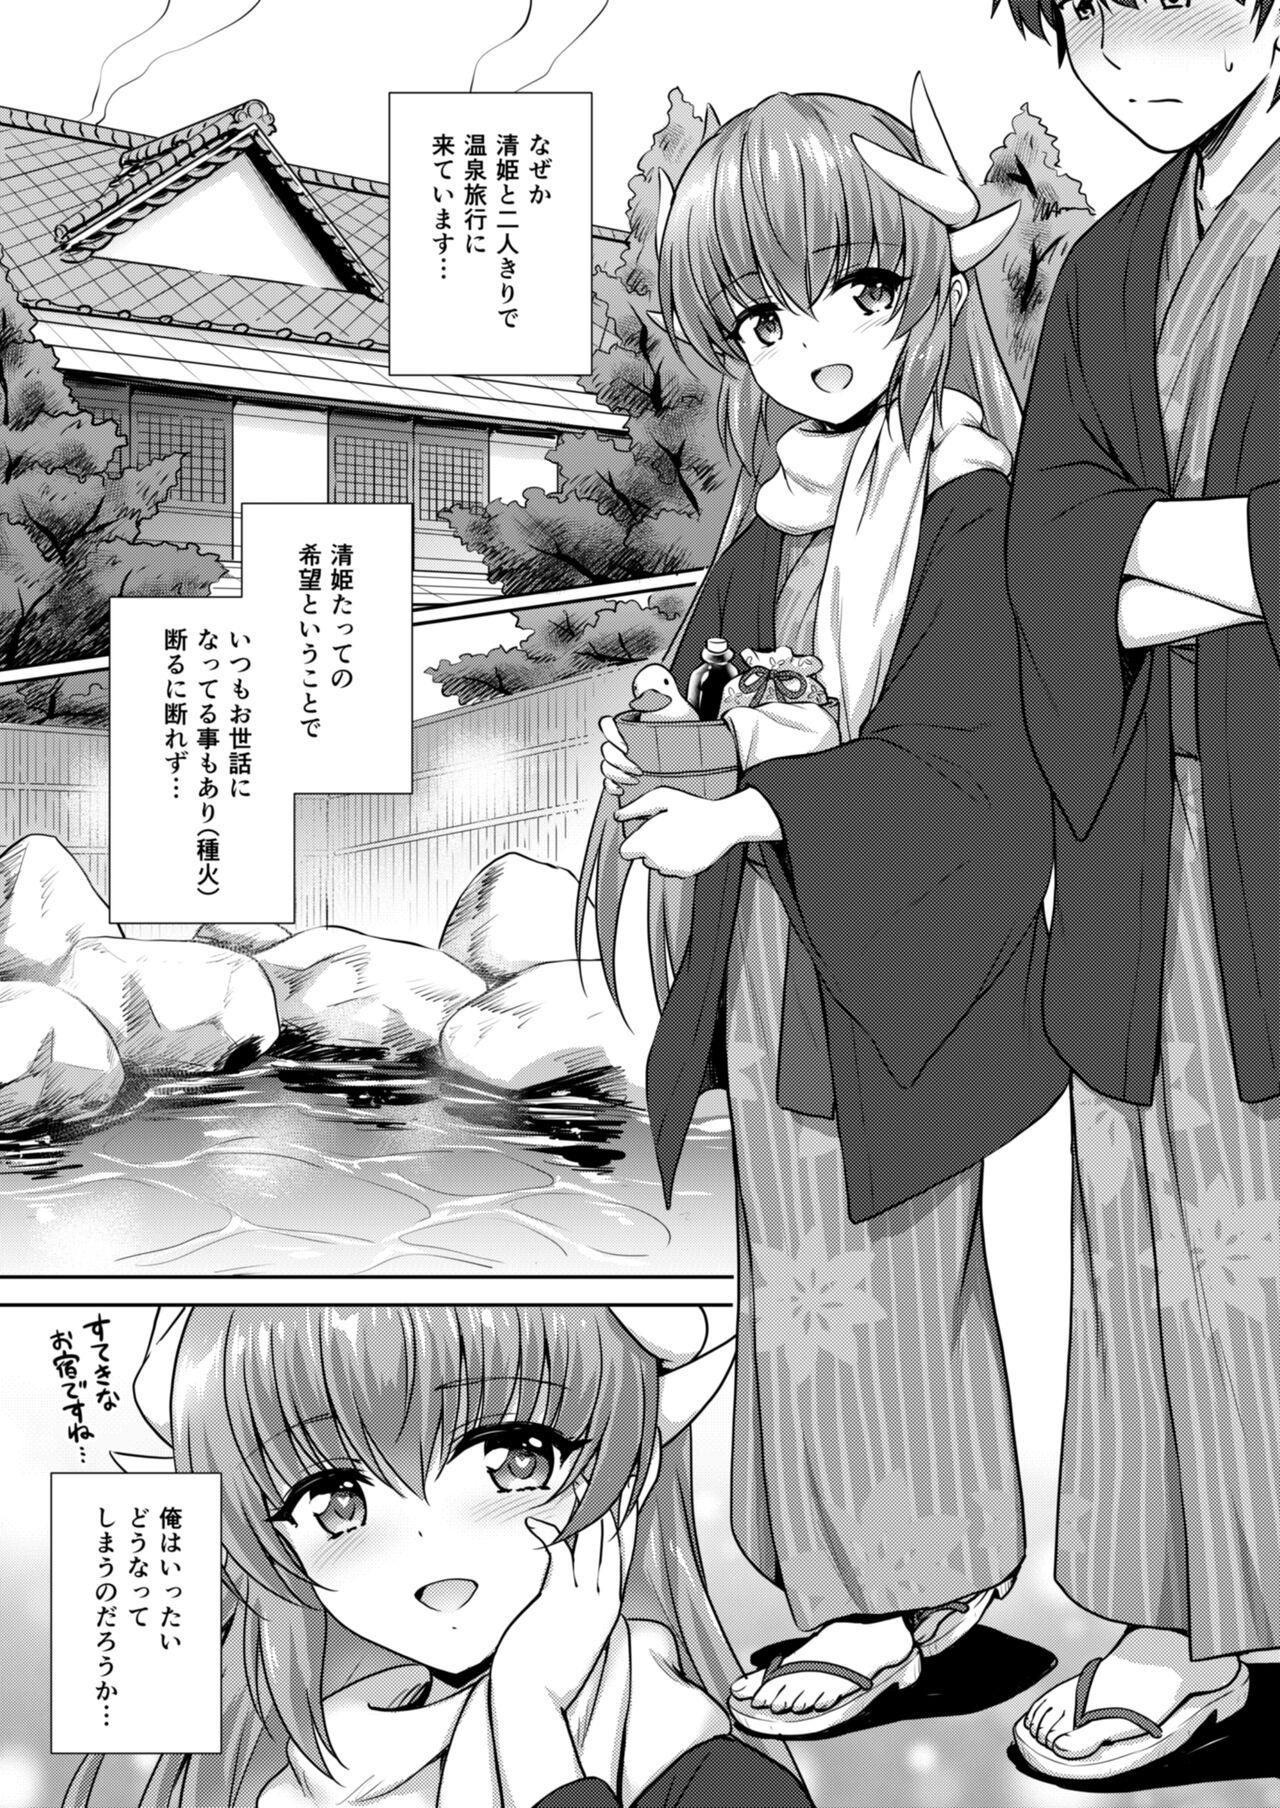 Amazing Kiyohime Onsen - Fate grand order Couple Porn - Page 2